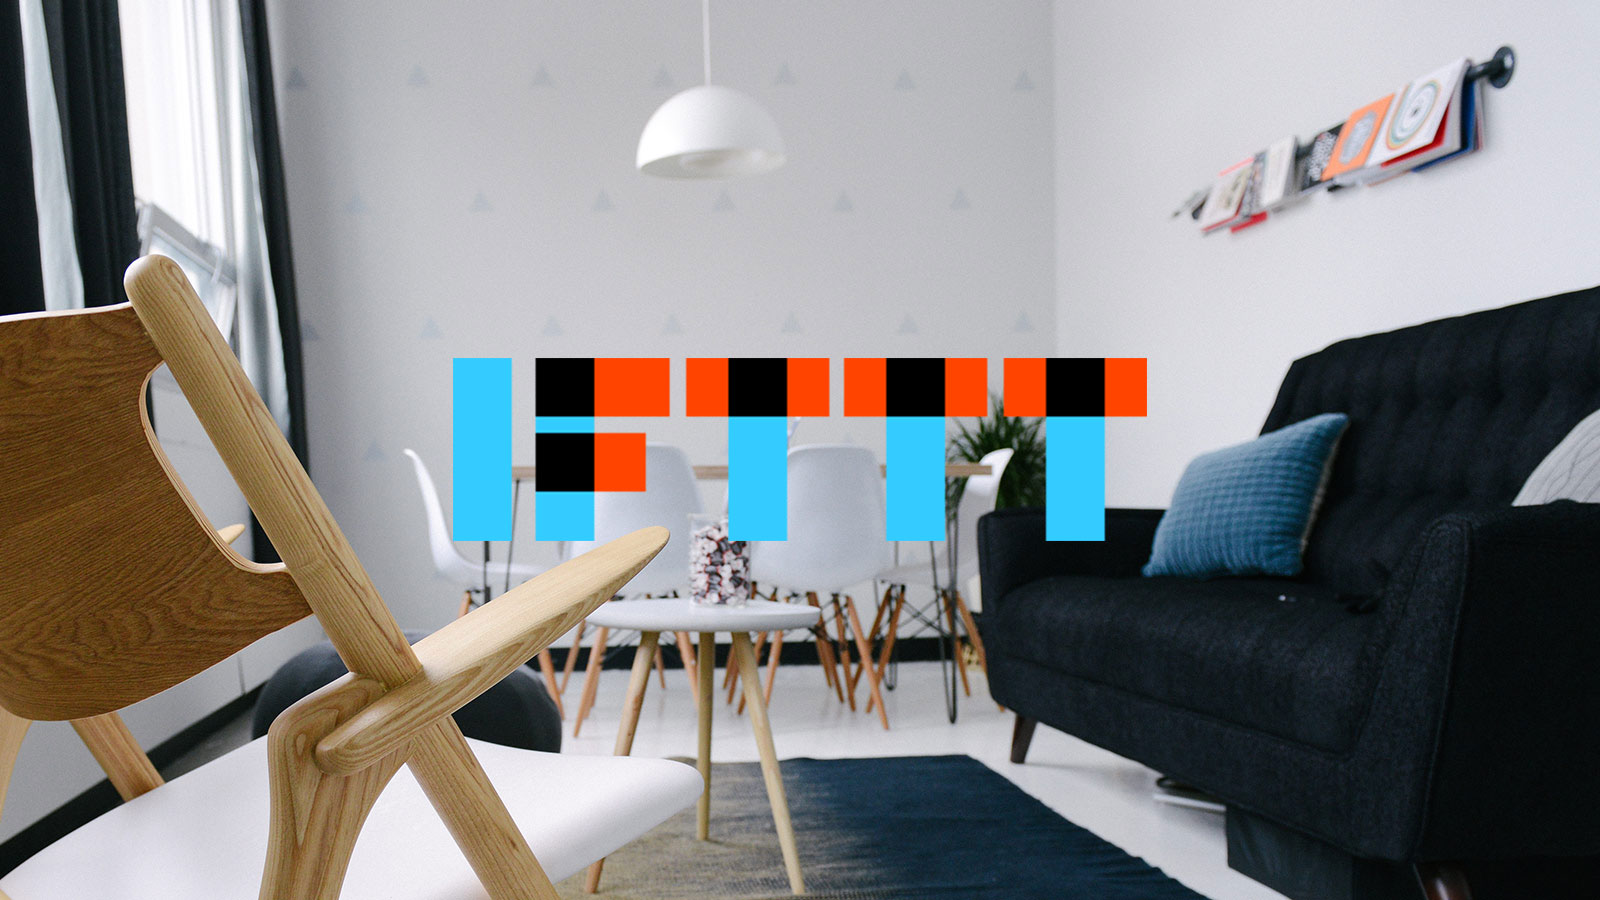 The 10 Best IFTTT recipes for your smart home